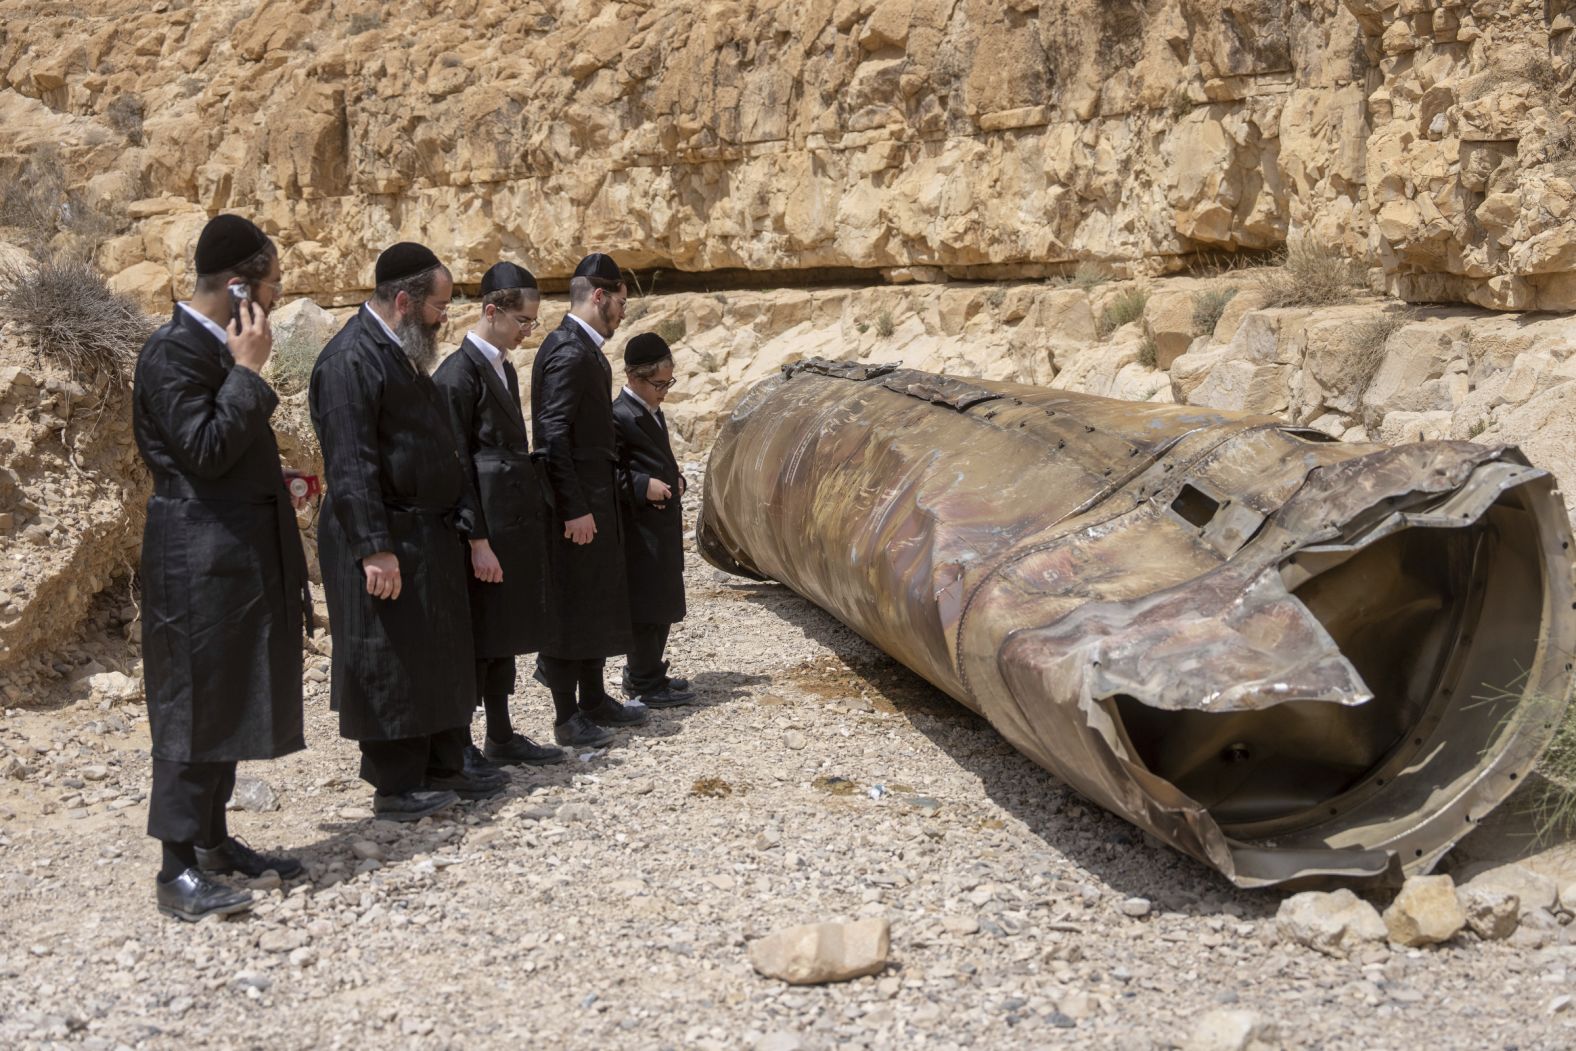 Ultra-Orthodox Jews observe part of an intercepted ballistic missile that fell in the desert near Arad, Israel, on Sunday, April 28. Nearly all the missiles and drones Iran launched at Israel in an <a href="index.php?page=&url=https%3A%2F%2Fwww.cnn.com%2F2024%2F04%2F14%2Fmiddleeast%2Fisrael-air-missile-defense-iran-attack-intl-hnk-ml%2Findex.html" target="_blank">unprecedented attack last month</a> were intercepted, according to Israeli and American officials. <a href="index.php?page=&url=https%3A%2F%2Fwww.cnn.com%2F2024%2F04%2F13%2Fmiddleeast%2Firan-drones-attack-israel-intl-latam%2Findex.html" target="_blank">The attack</a> followed an Israeli strike on an Iranian diplomatic complex in Syria.